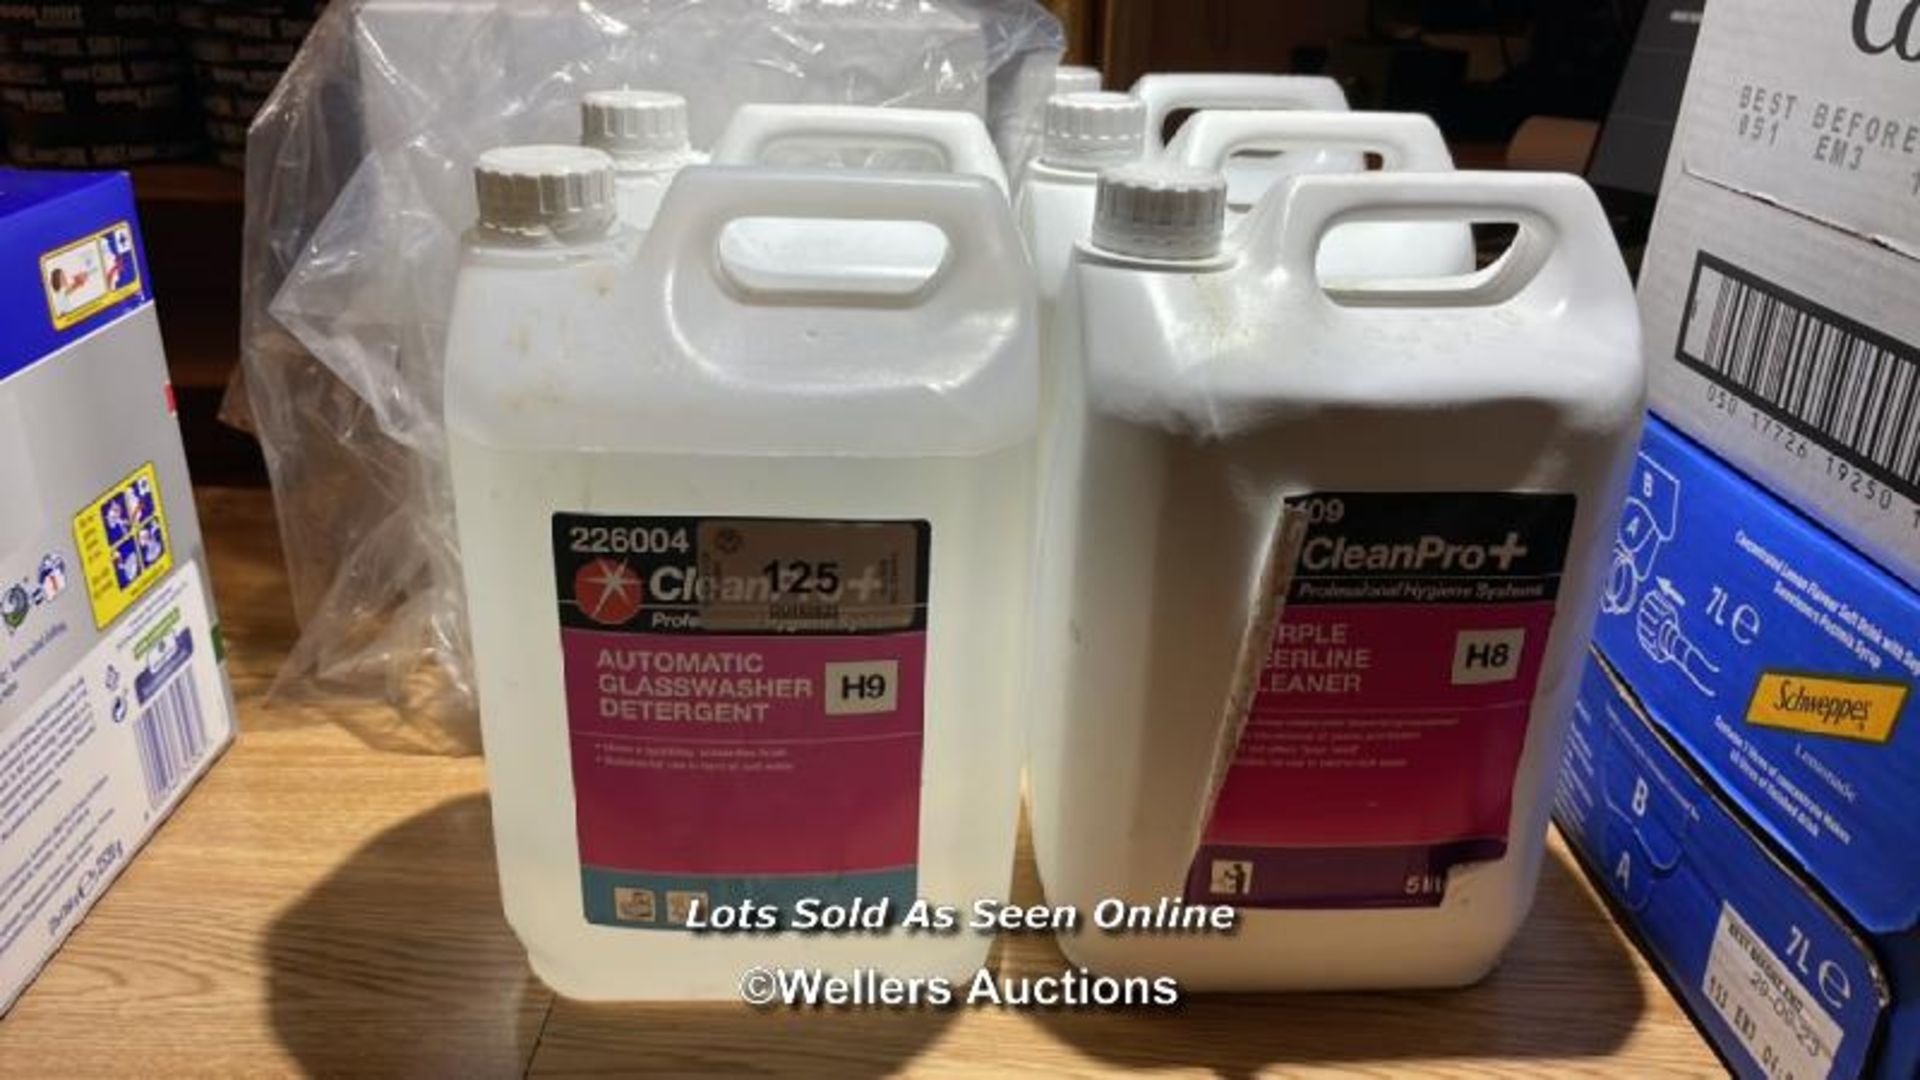 LARGE QUANTITY OF PURPLE BEER LINE CLEANER AND DISHWASHER DETERGENT / COLLECTION LOCATION: OLD